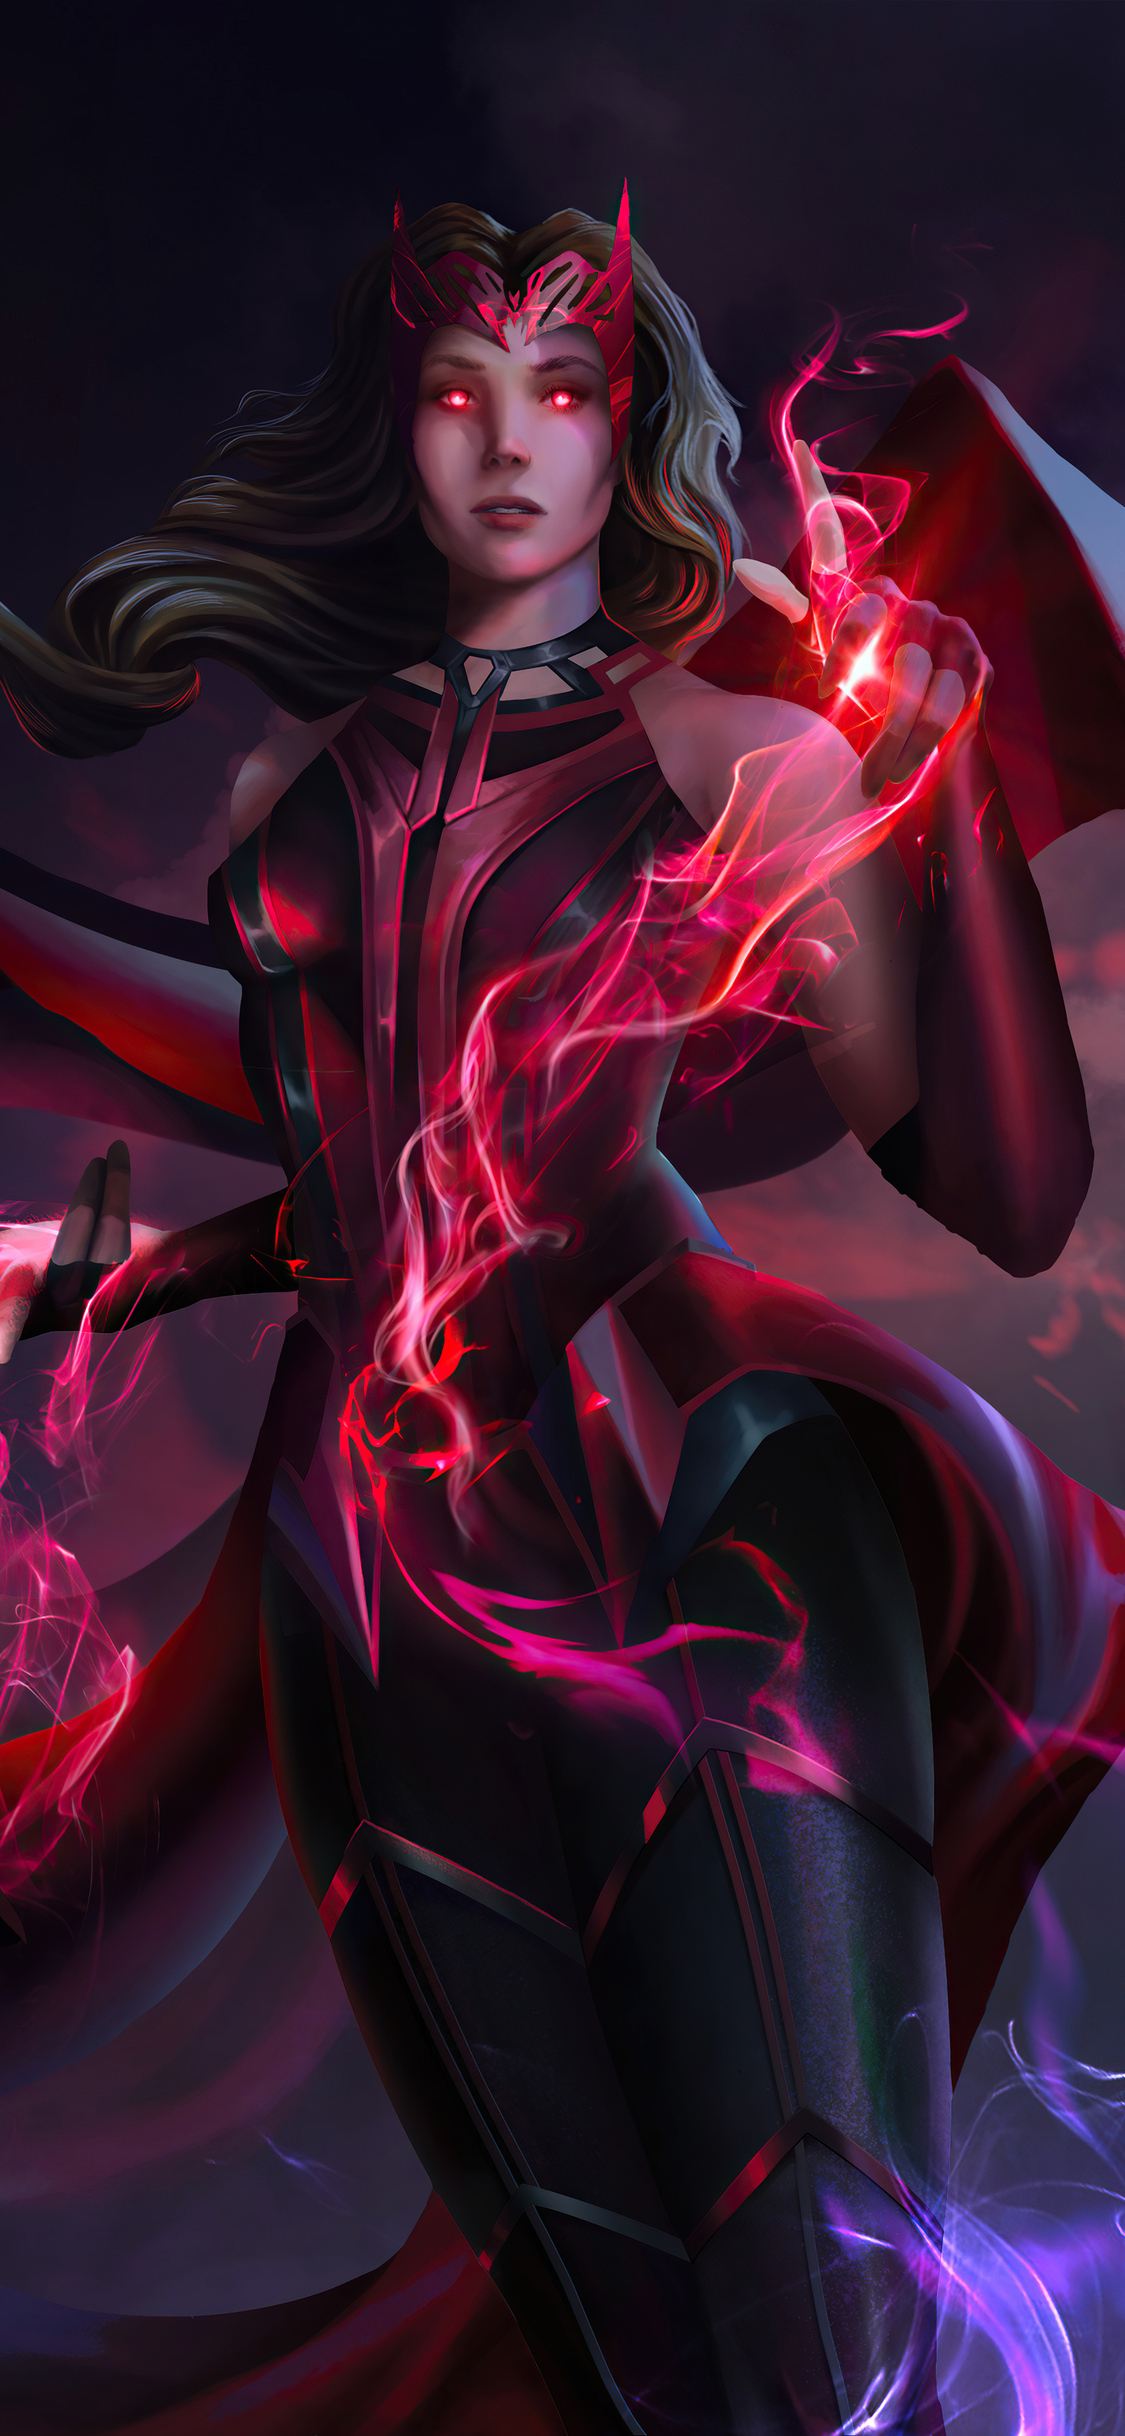 Download wallpaper 750x1334 the scarlet witch wanda vision 2021 fan art  iphone 7 iphone 8 750x1334 hd background 26969